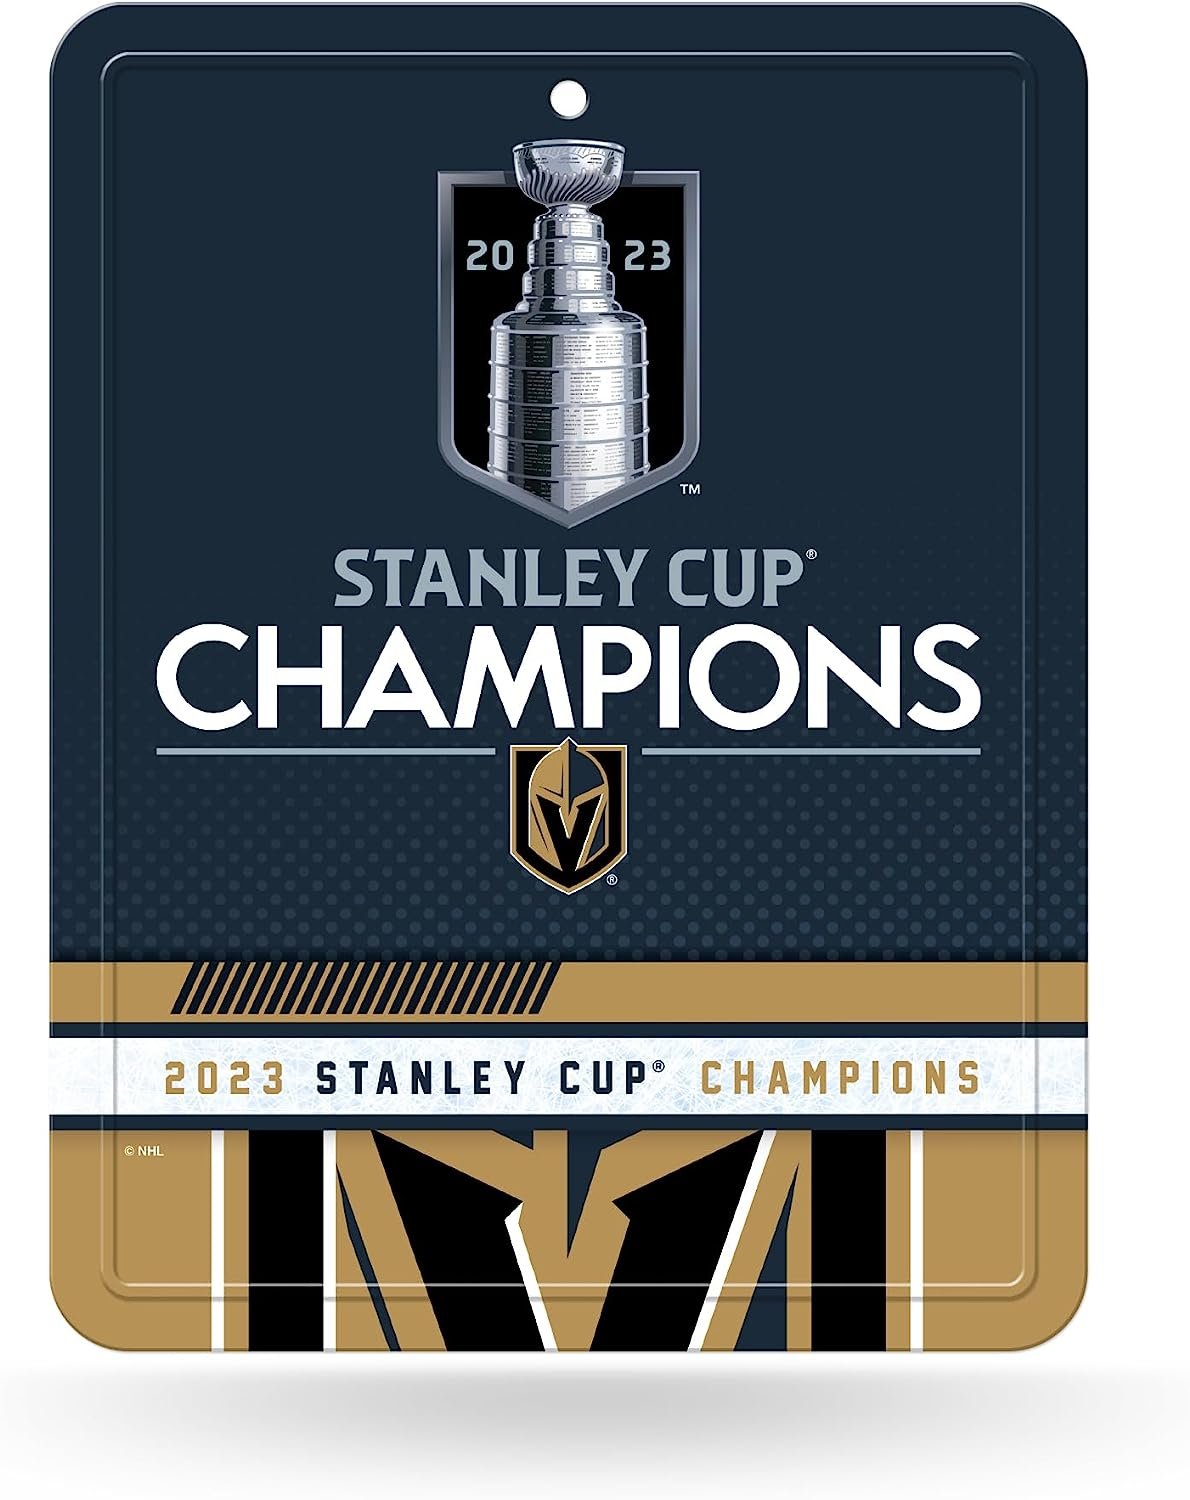 Vegas Golden Knights 2023 Stanley Cup Champions Premium 8.5x11 Inch Metal Parking Sign Home Office Wall Decor